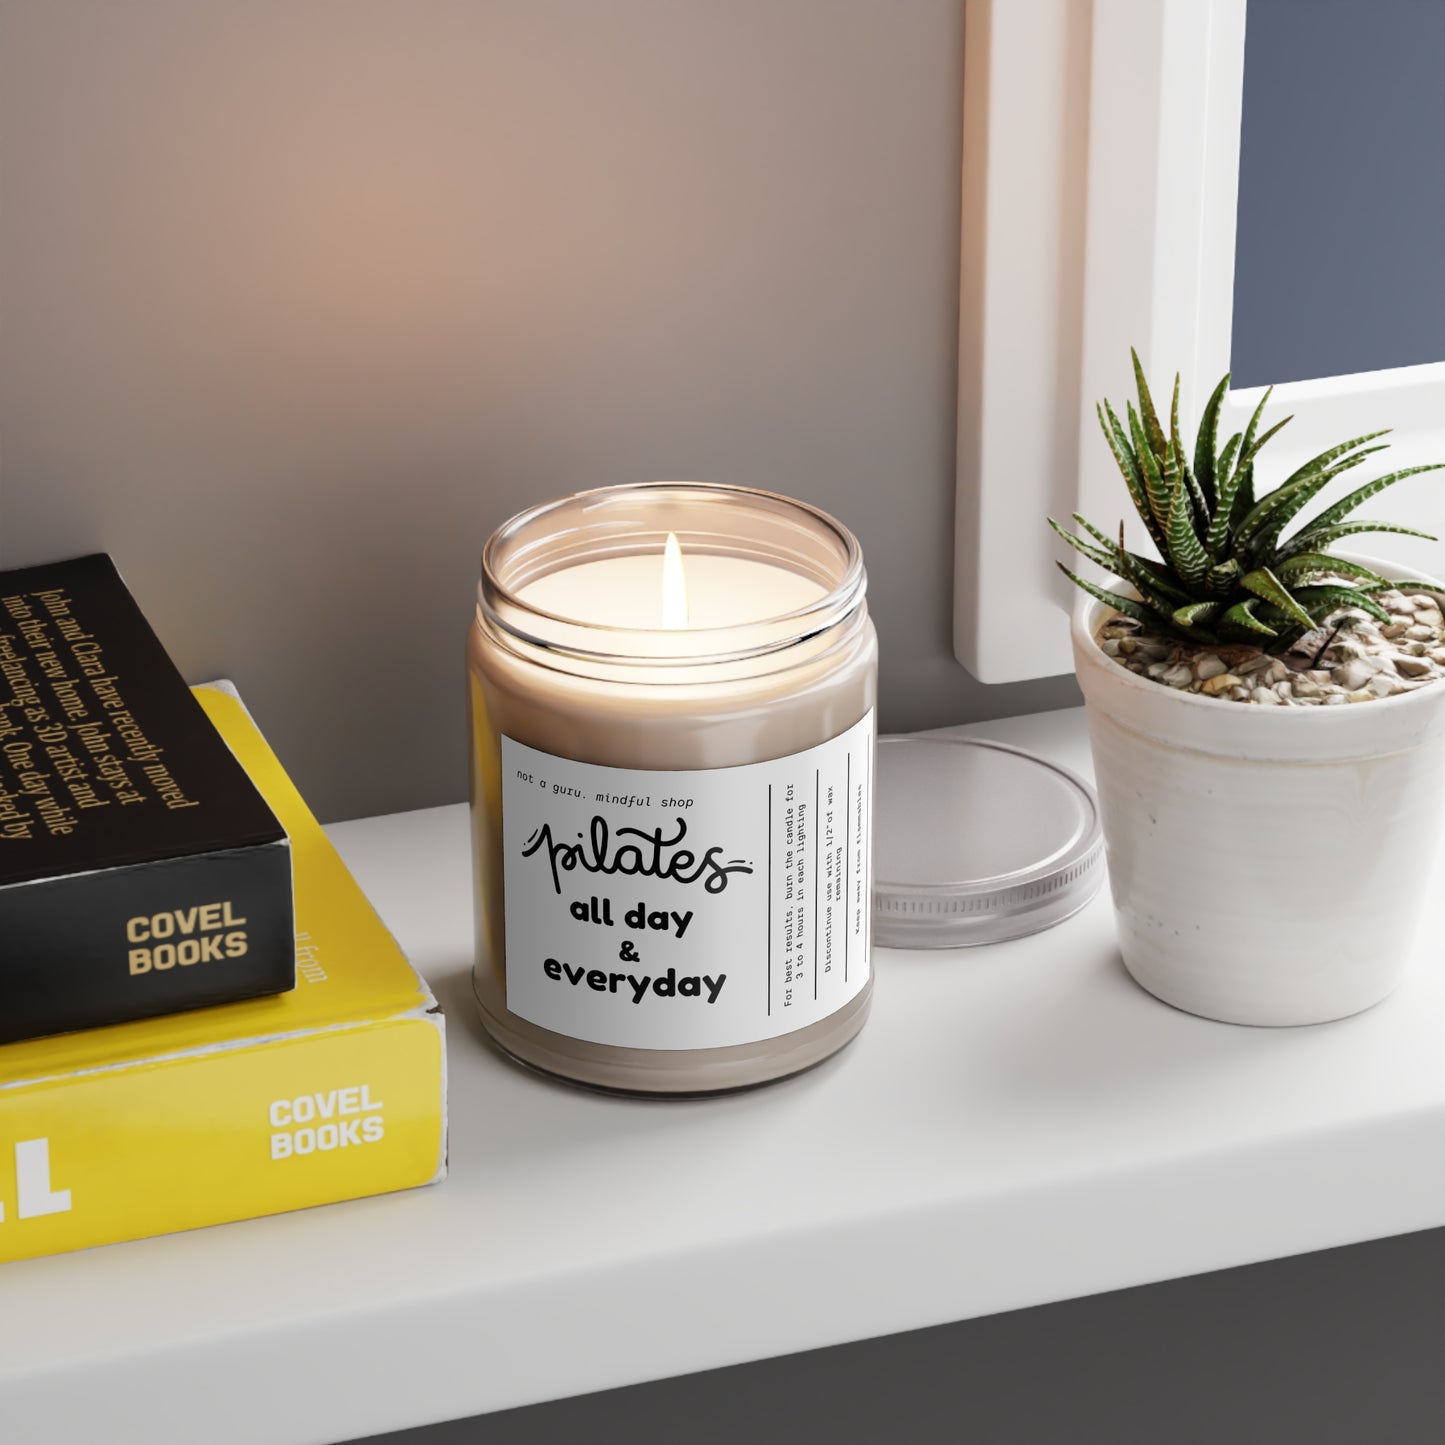 Pilates All Day & Everyday Scented Candles